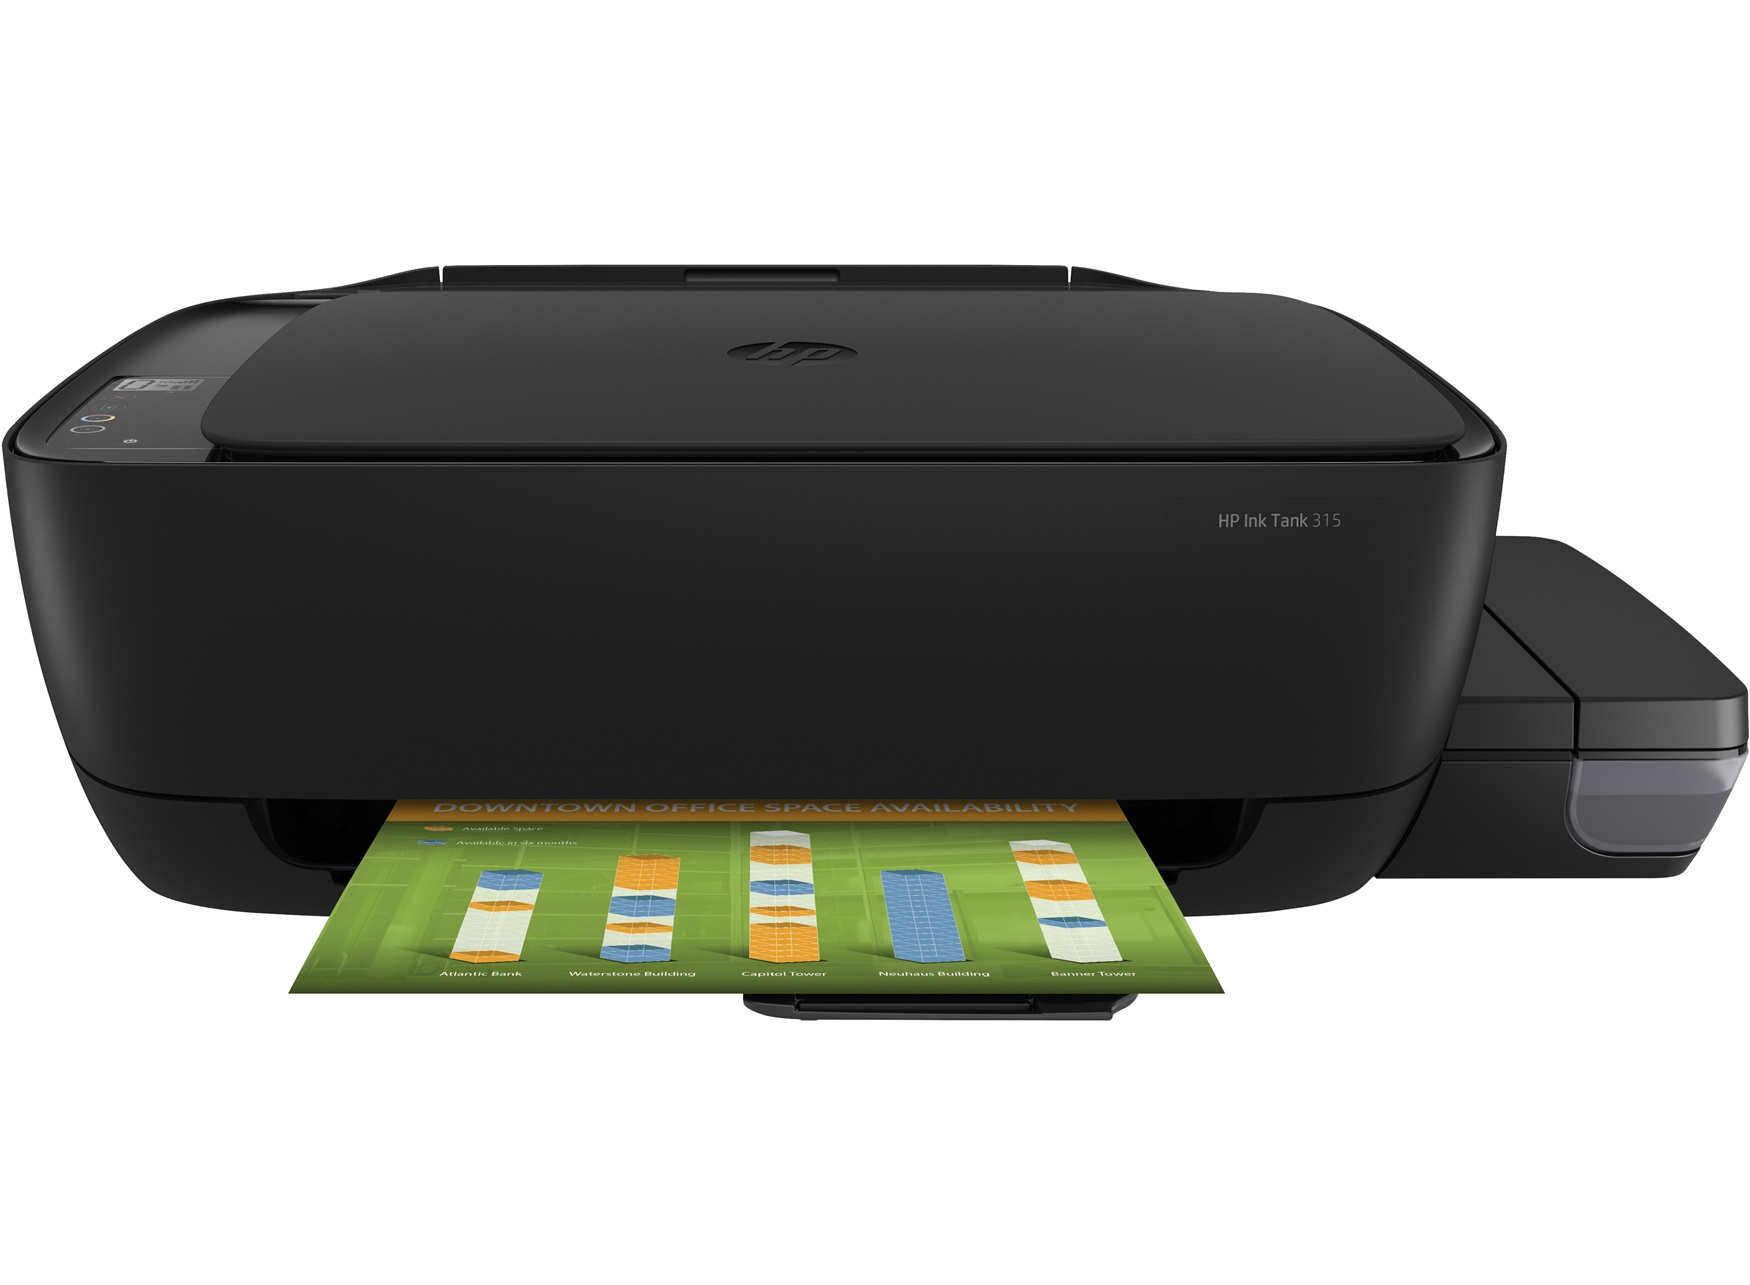 HP 315 All-in-One Ink Tank Multifunction Printer